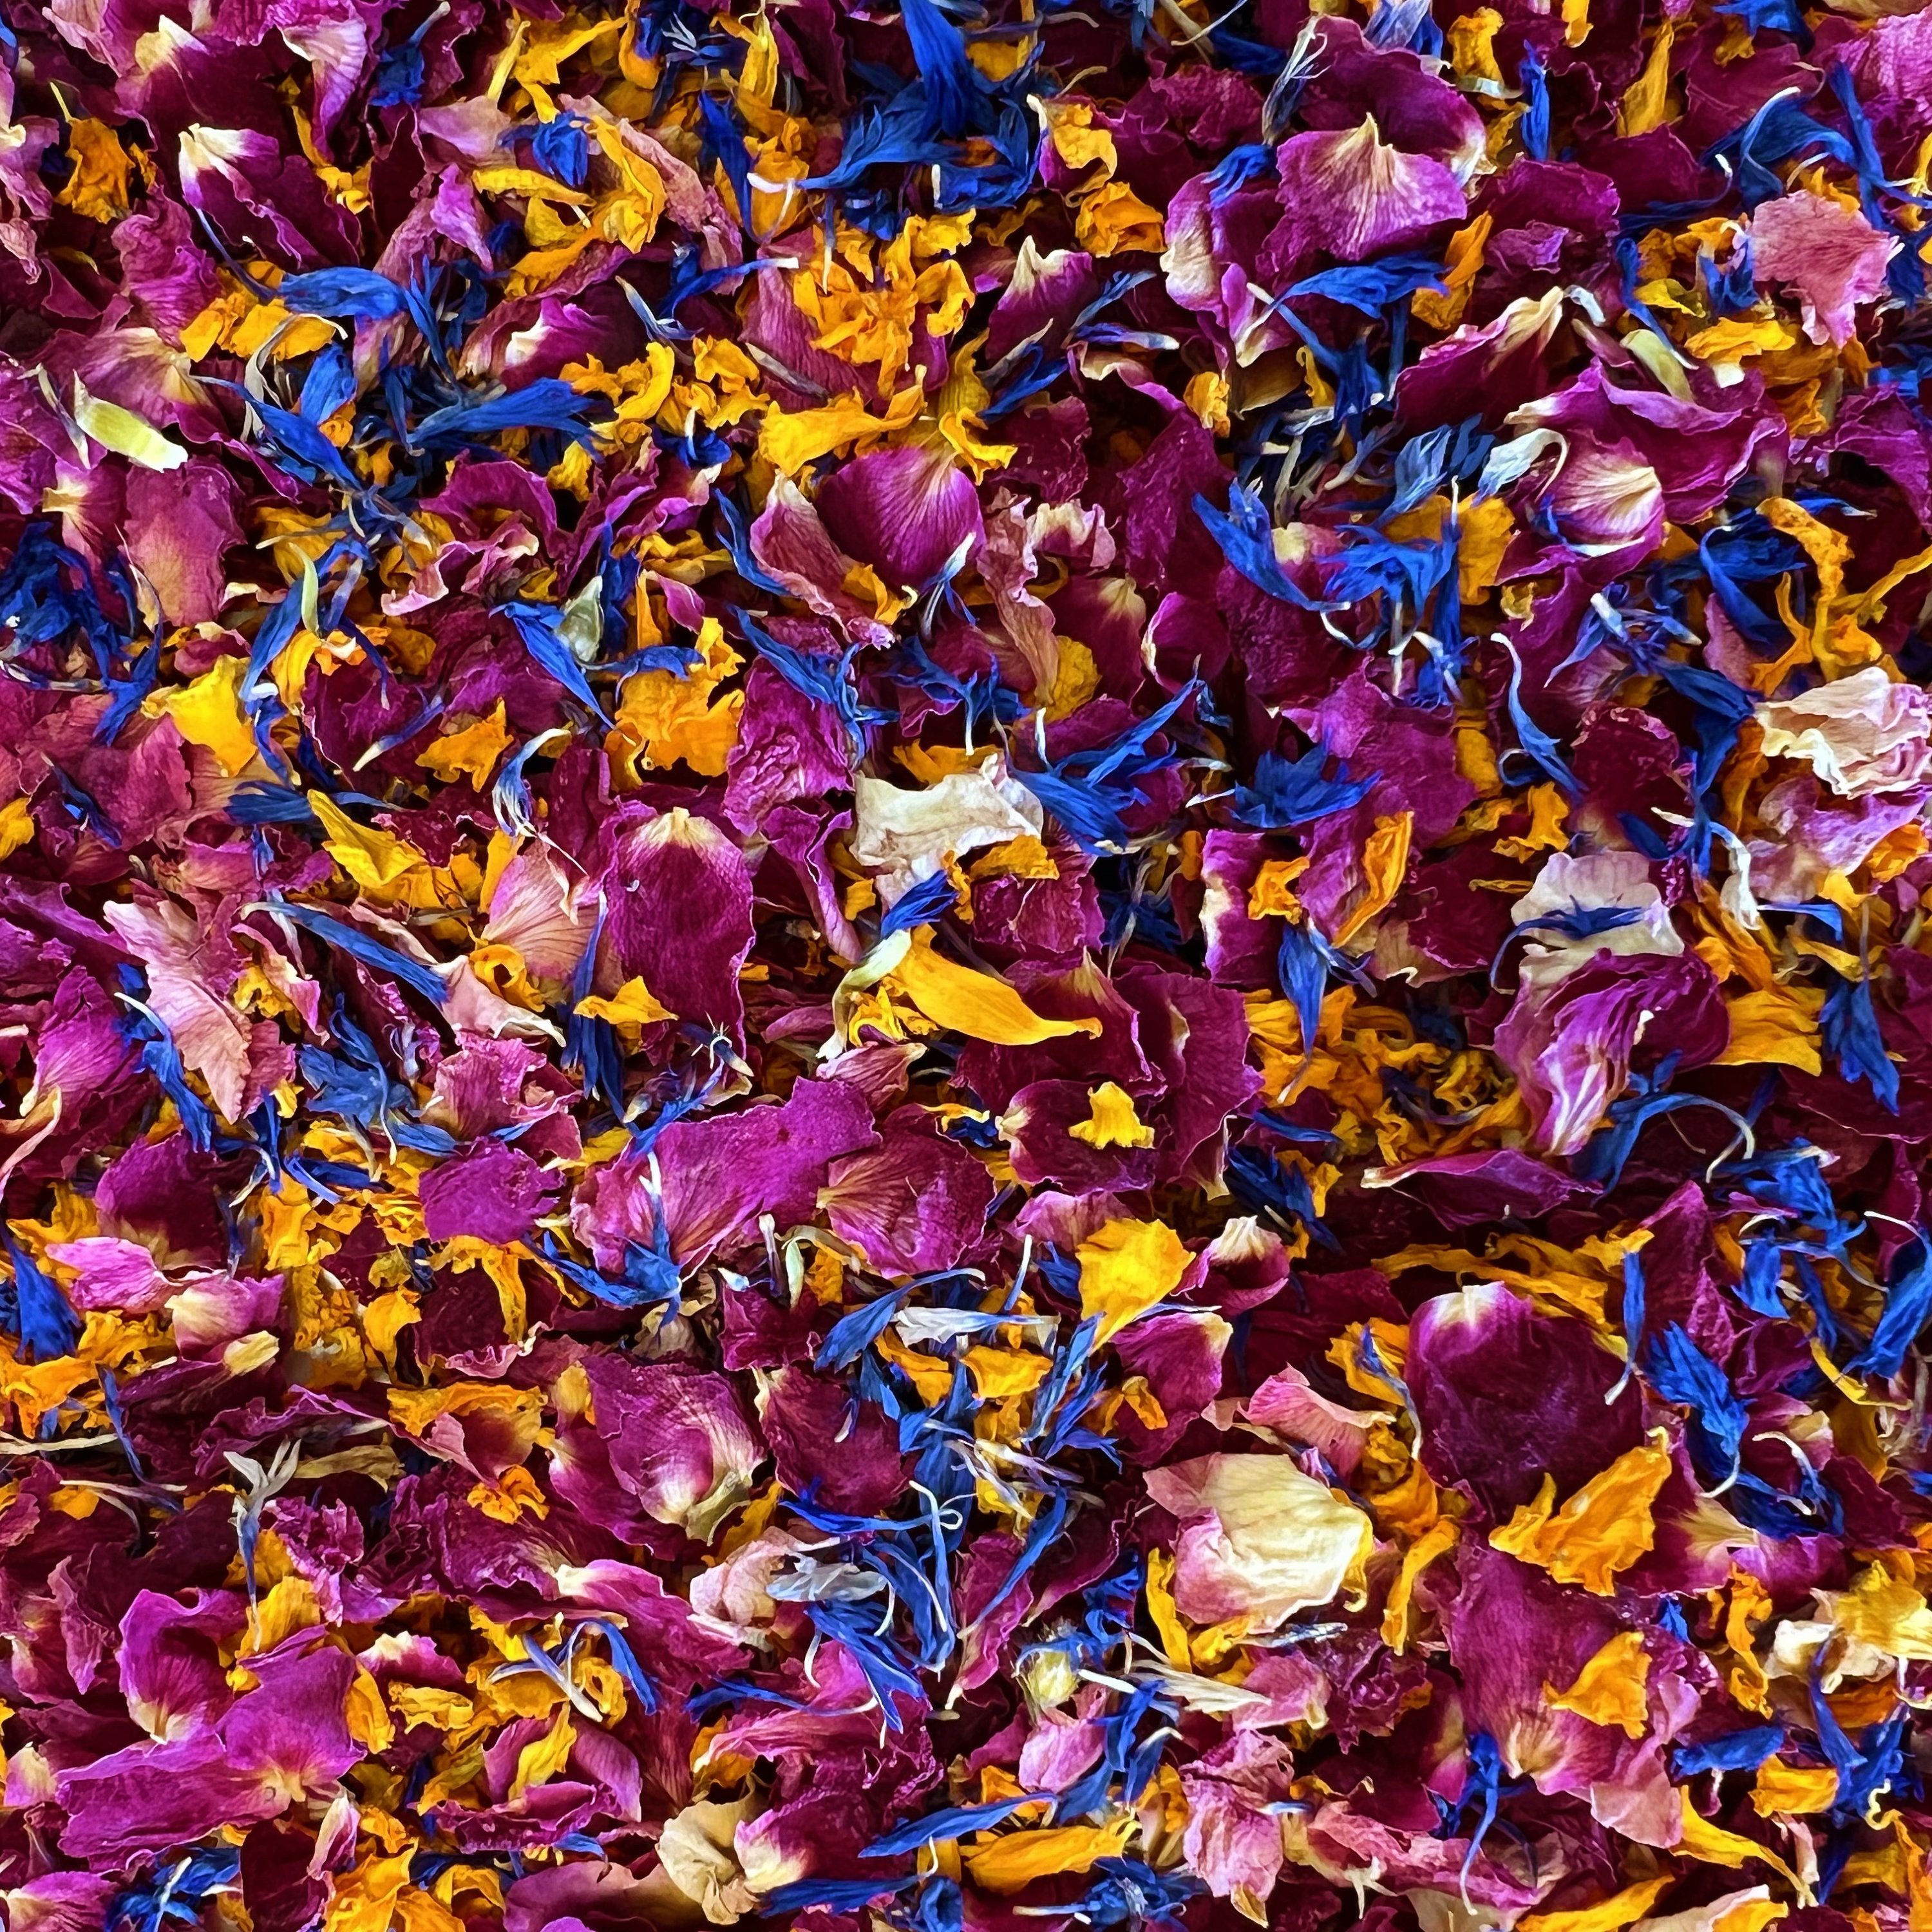 Freeze-Dried Edible Flowers (Mini Roses & Mixed Flower Petals)